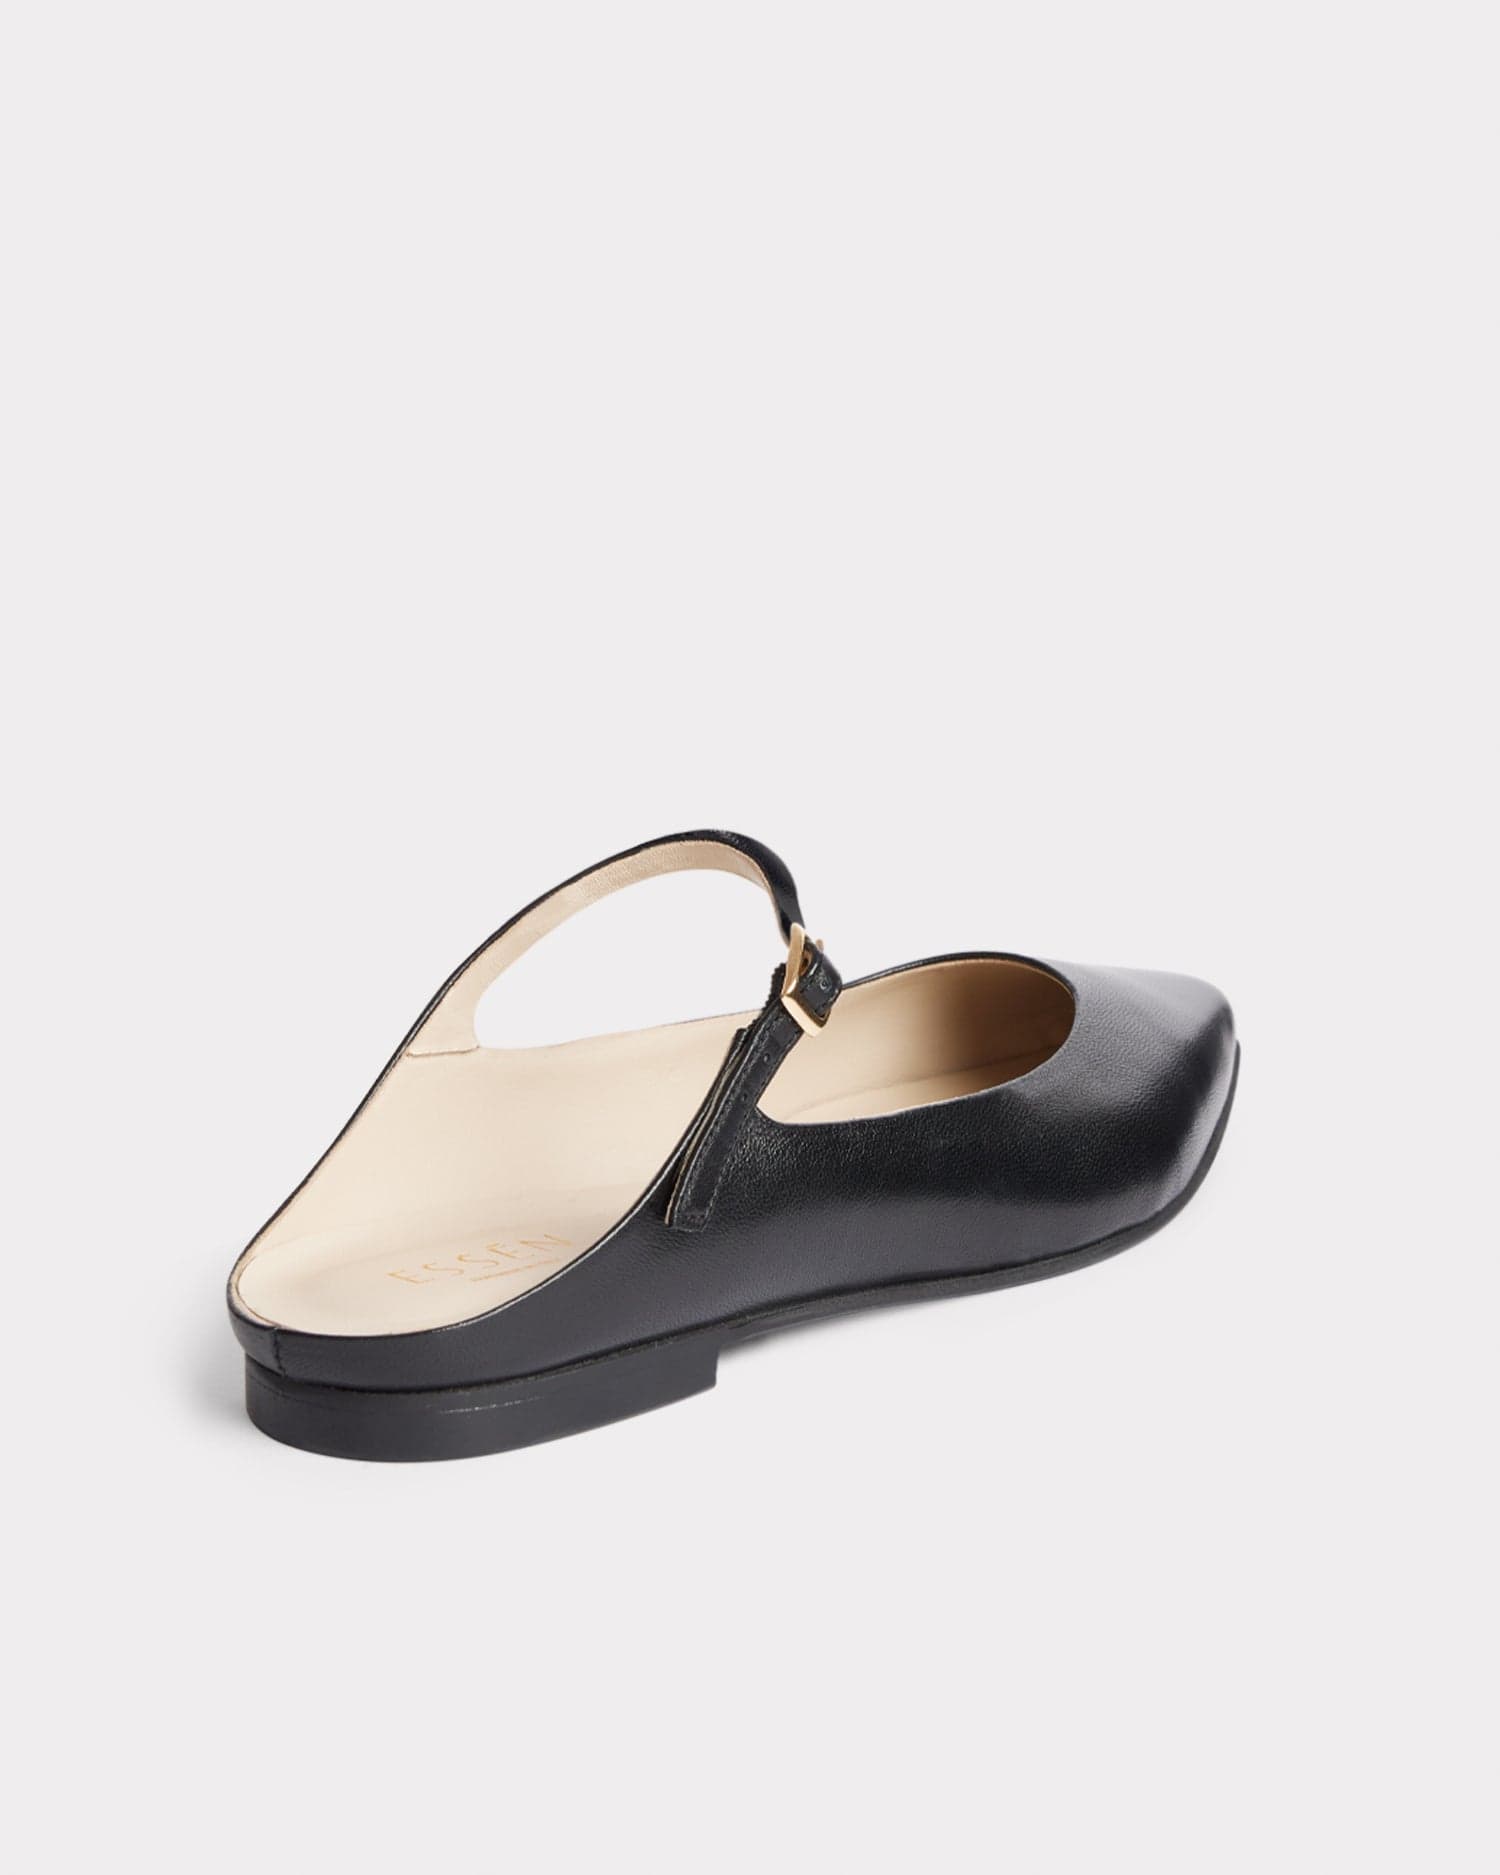 eco chic black leather mary jane slides with pointed toe